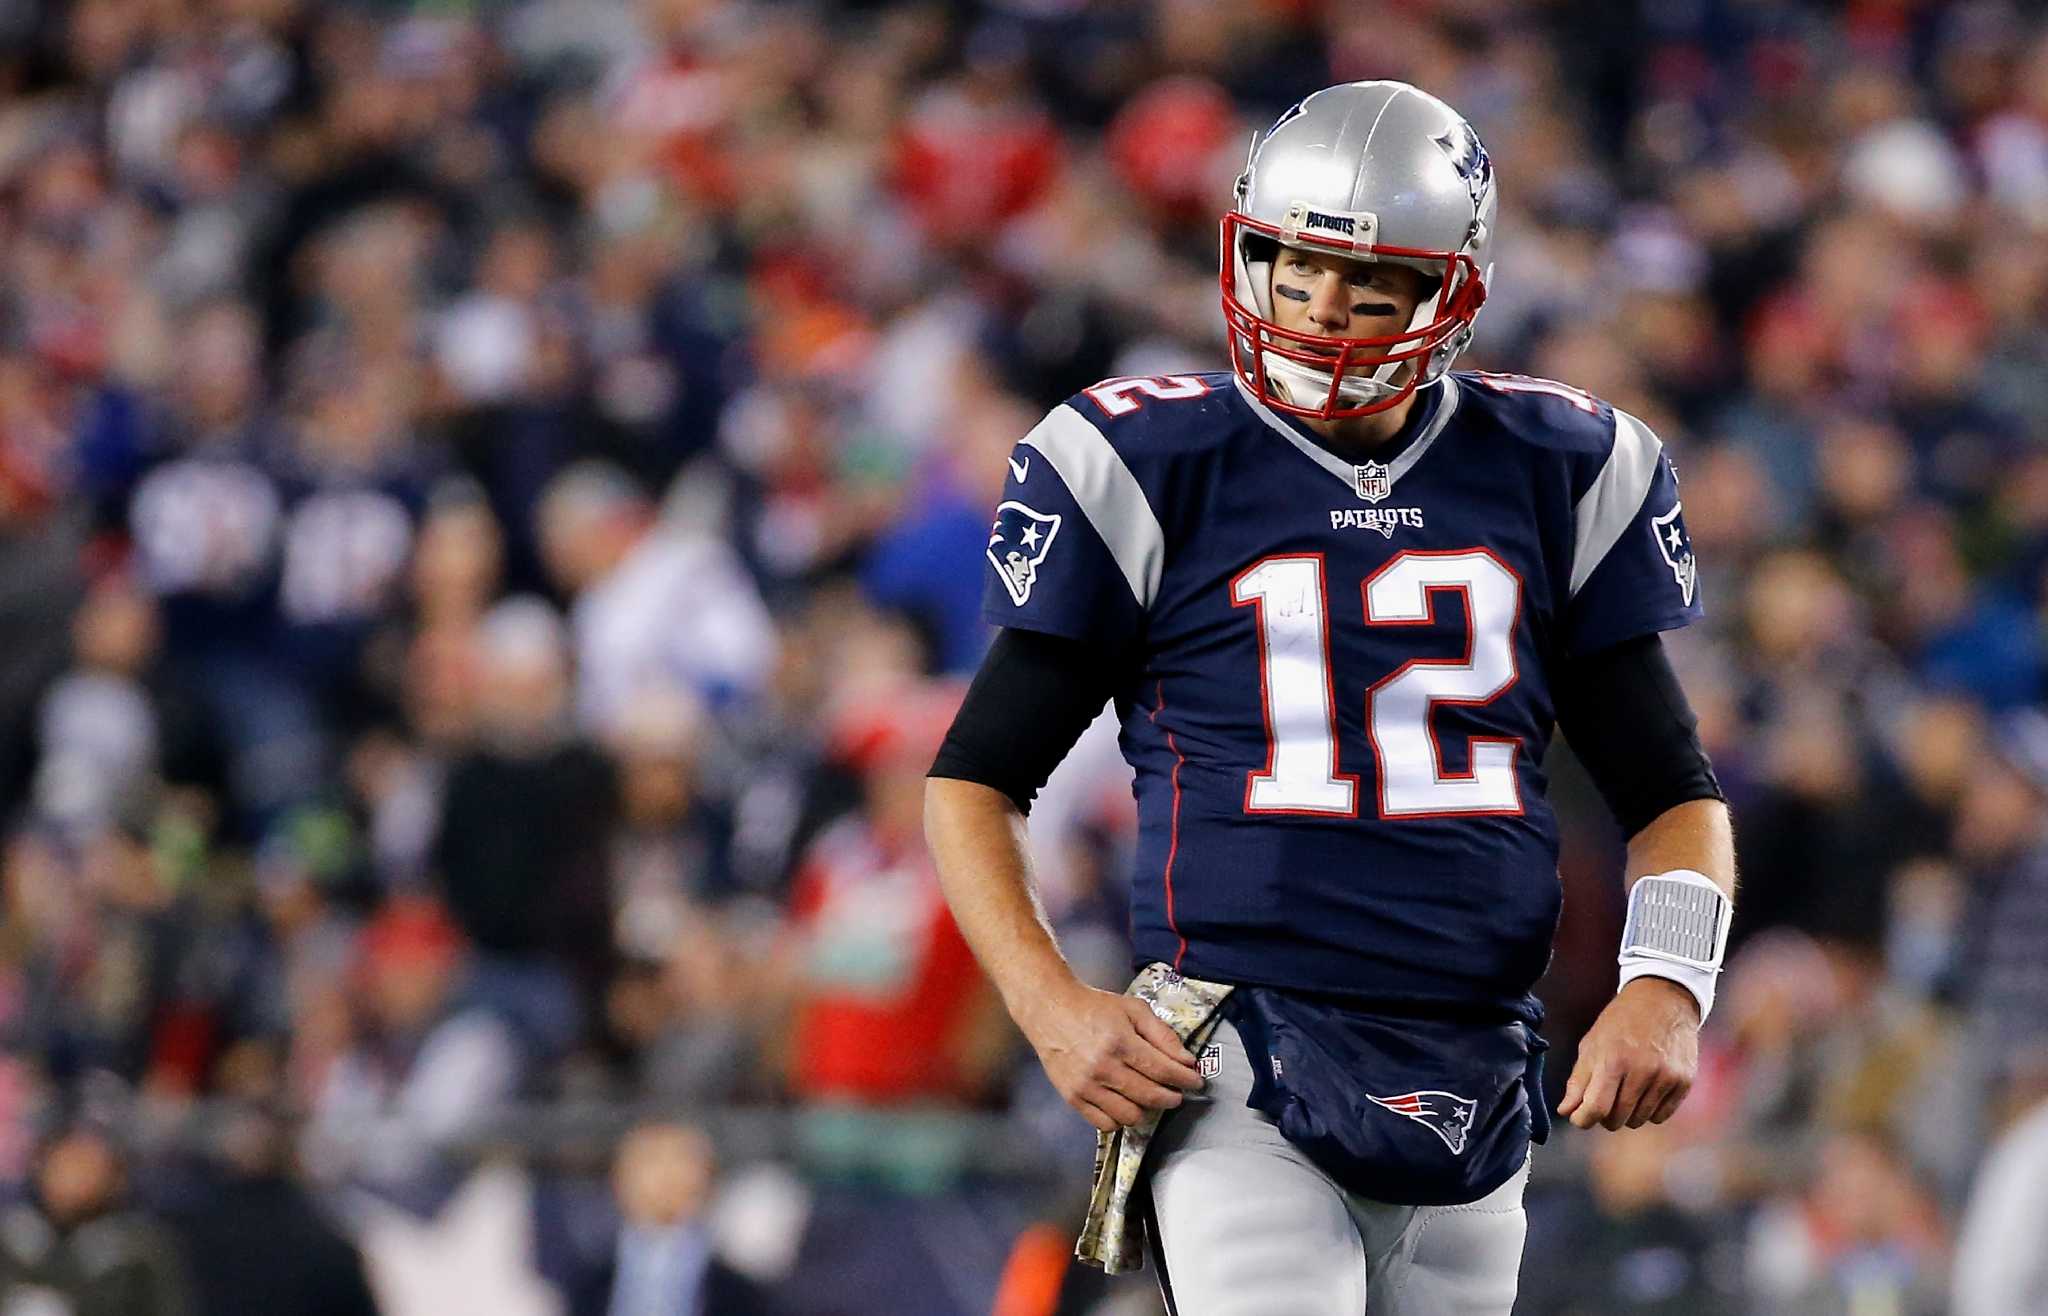 Pats' Brady finally faces 49ers on road